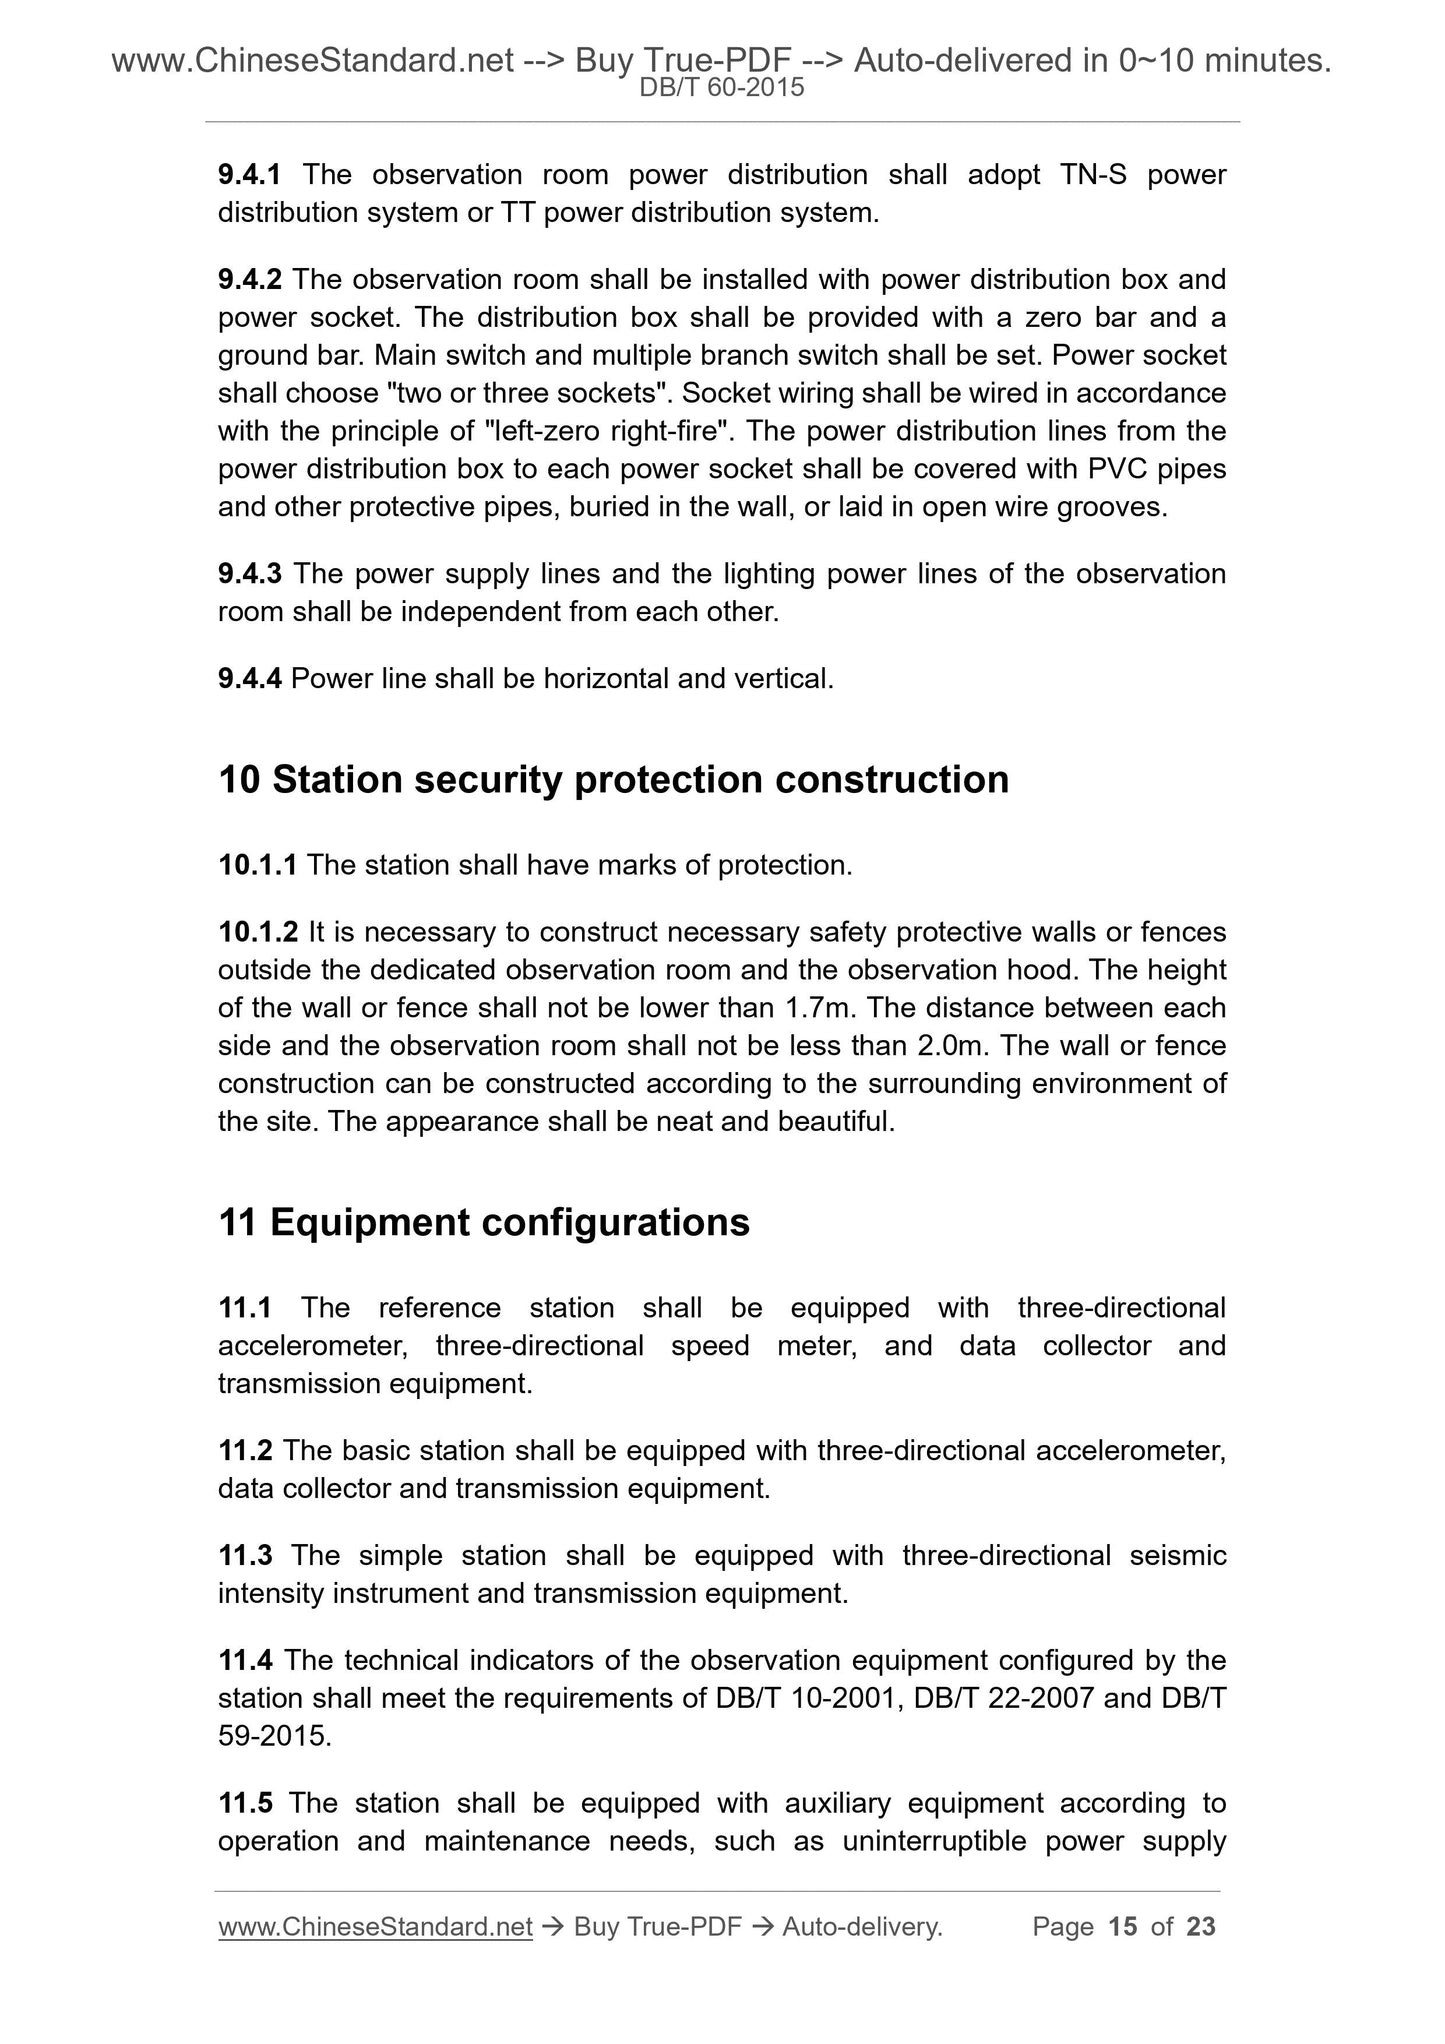 DB/T 60-2015 Page 8